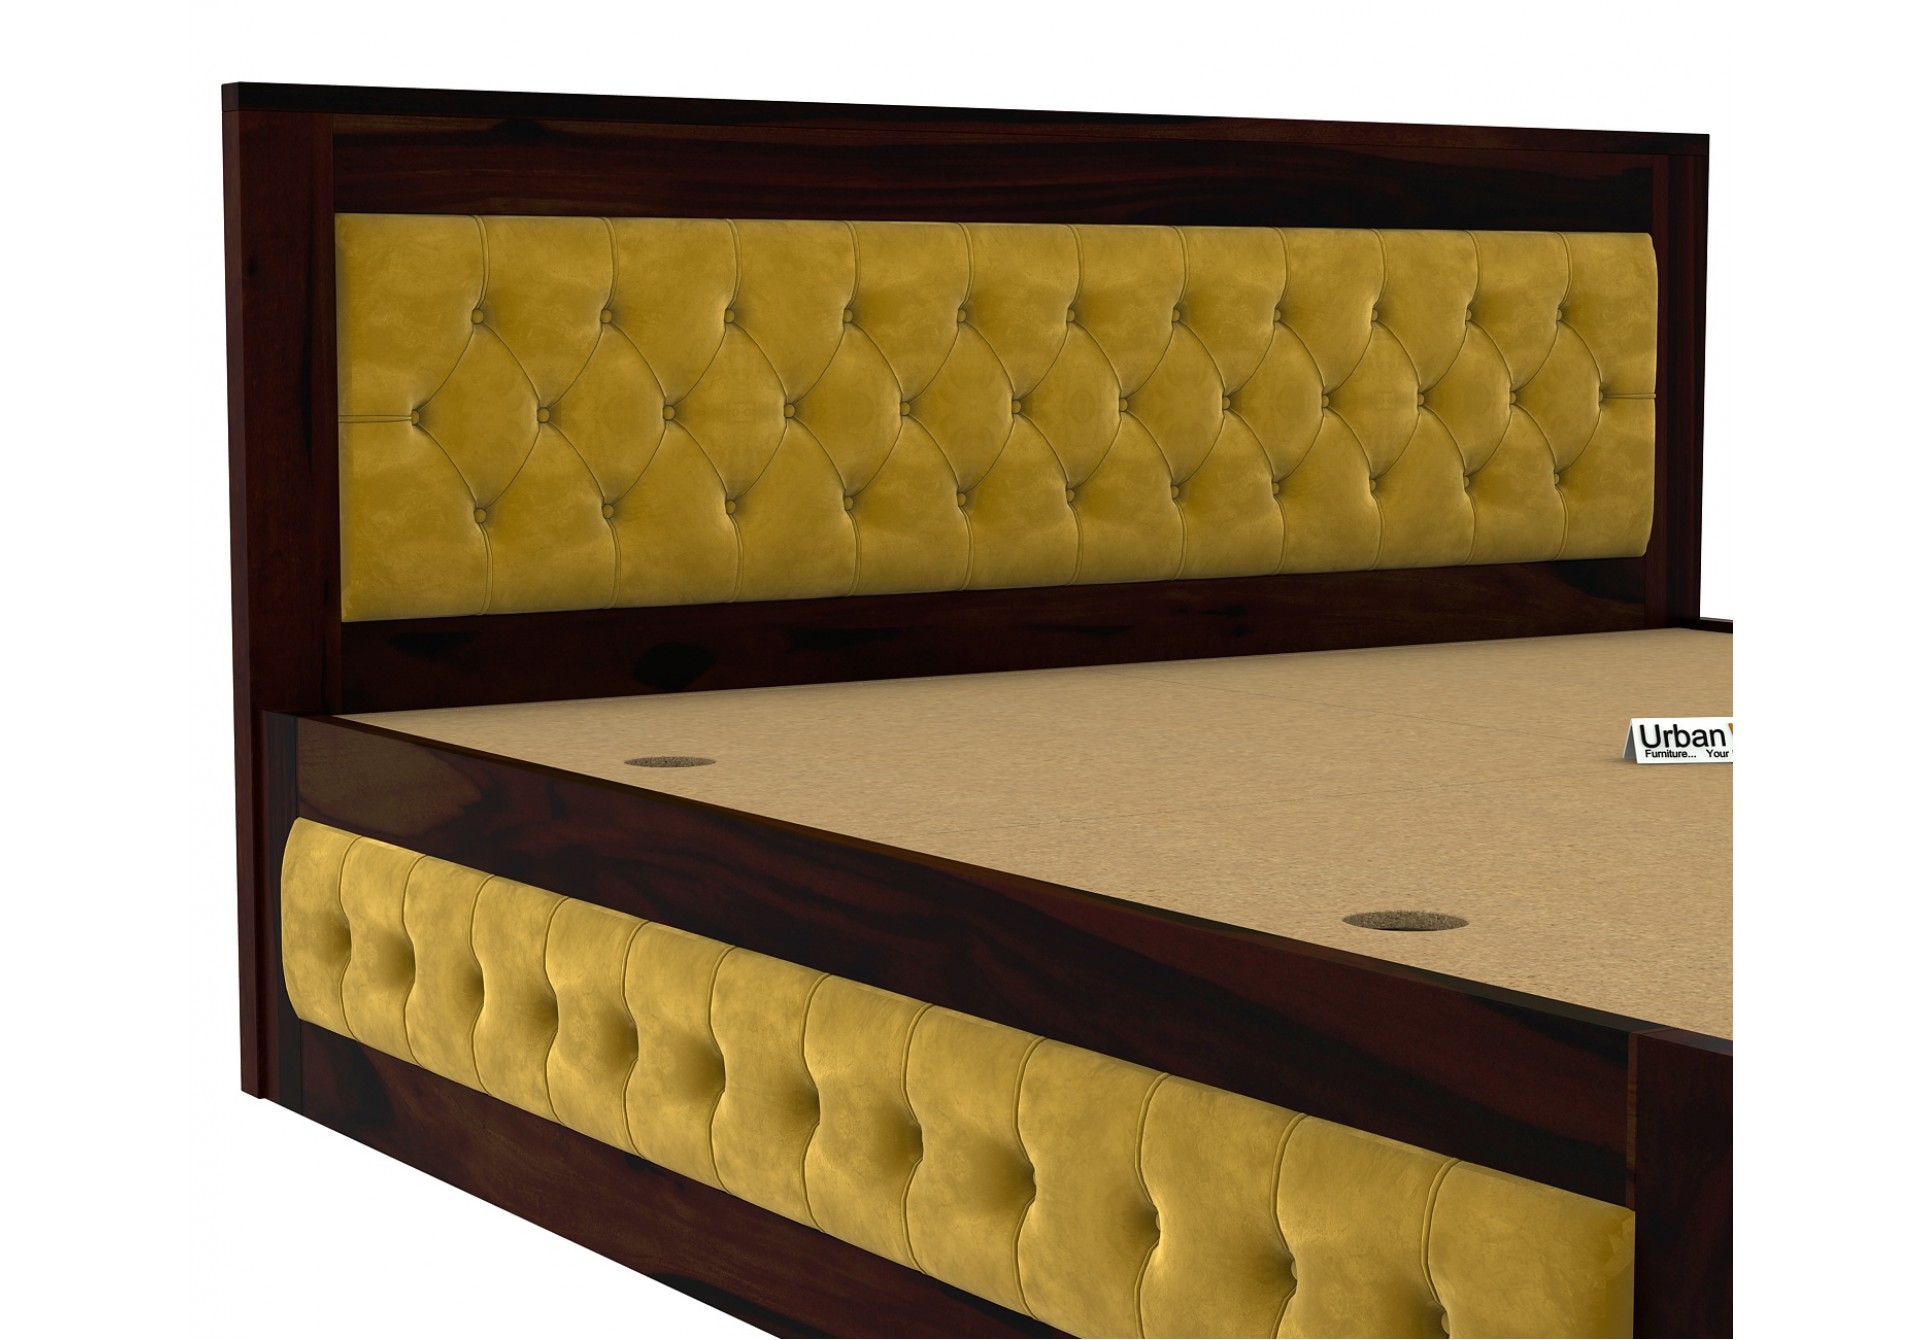 Jolly Wooden Bed with Box Storage 